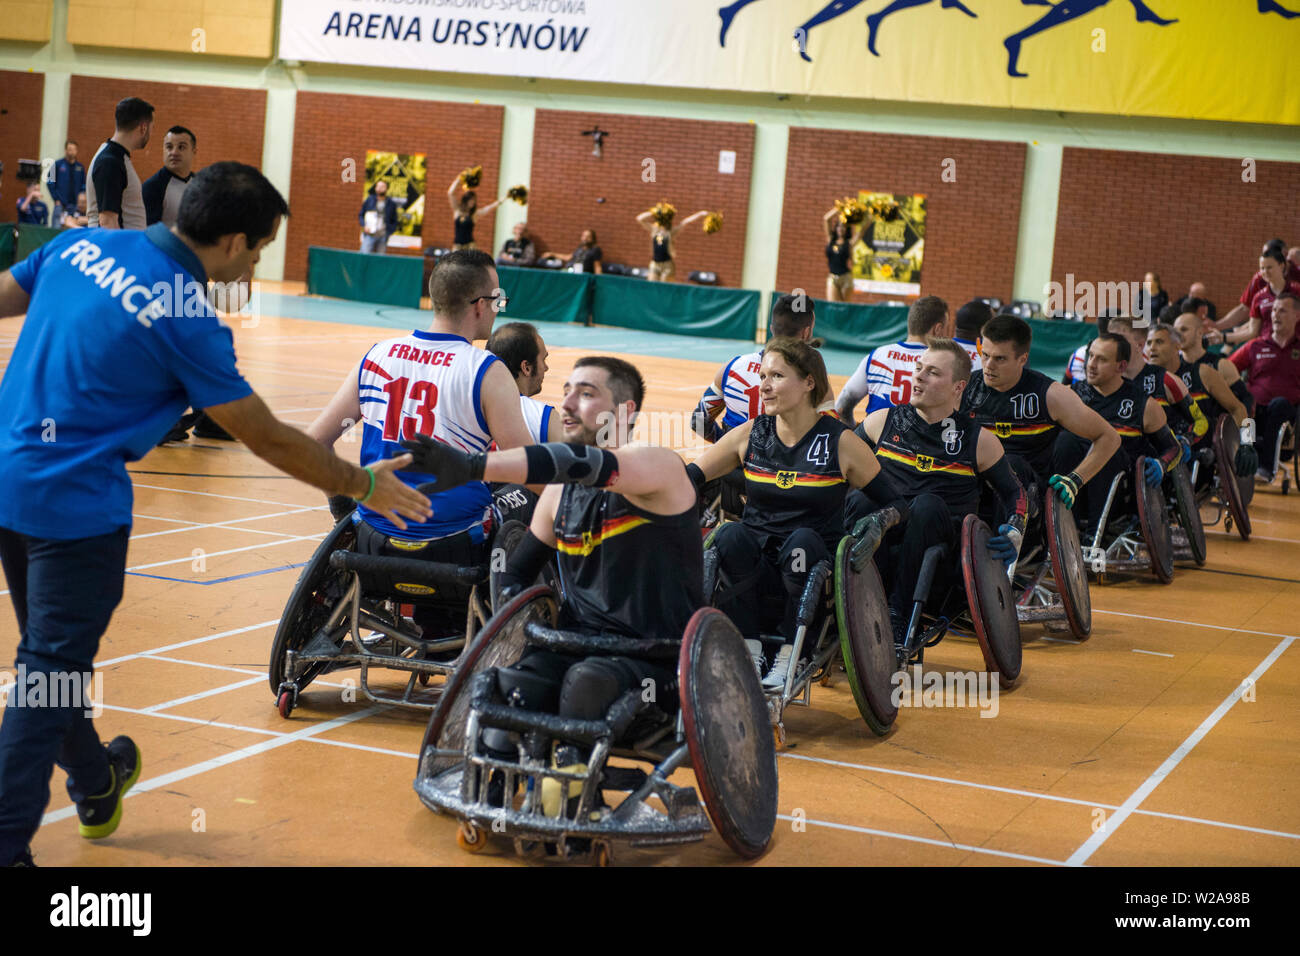 Players greet each other with hi-fives, after the game.The French National Team beat the Germans, 42:47 during the final and won the Metro Cup for the second time. The Metro Cup is the largest international Wheelchair Rugby Tournament in Poland. On 4-6 July 2019, the seventh edition of this event was held at the Ursynów Arena in Warsaw. Wheelchair rugby is a Paralympic sports discipline for people with spinal cord injury in the cervical segment and people with leg disorders. Stock Photo